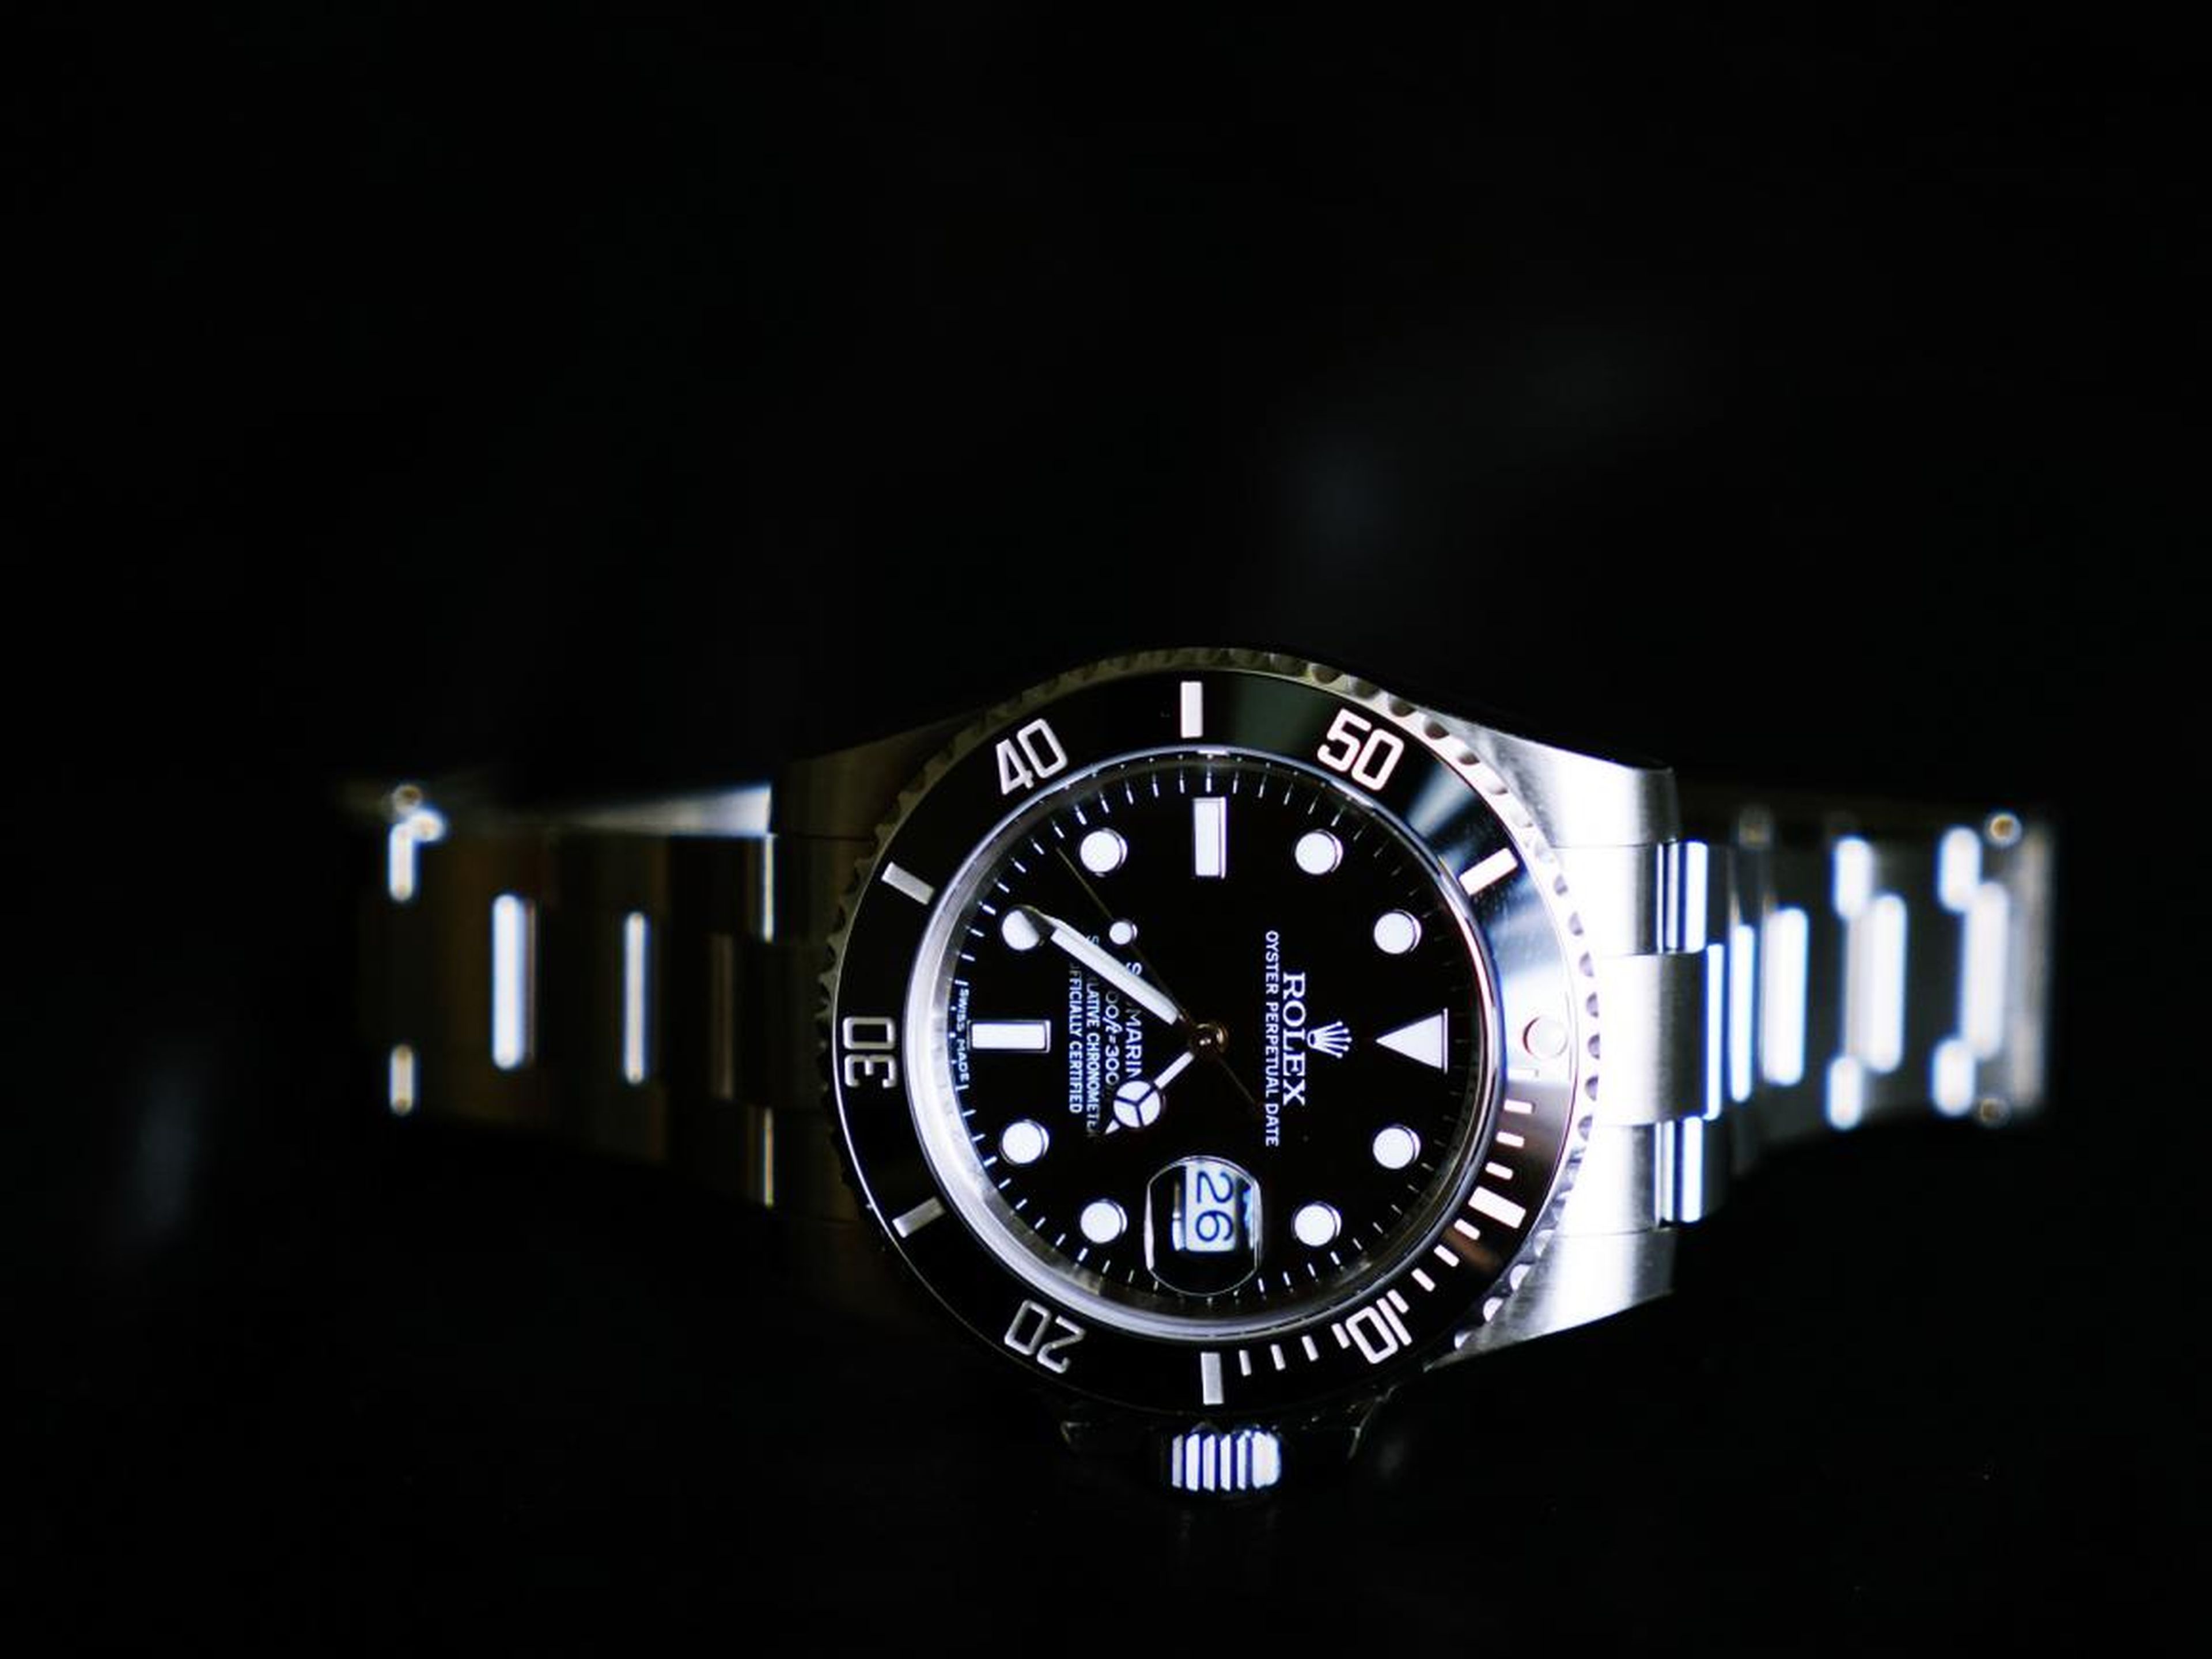 So, how do these prices stack up against other luxury watches on the market? As Business Insider previously reported, an entry-level Rolex starts at $5,000 ...